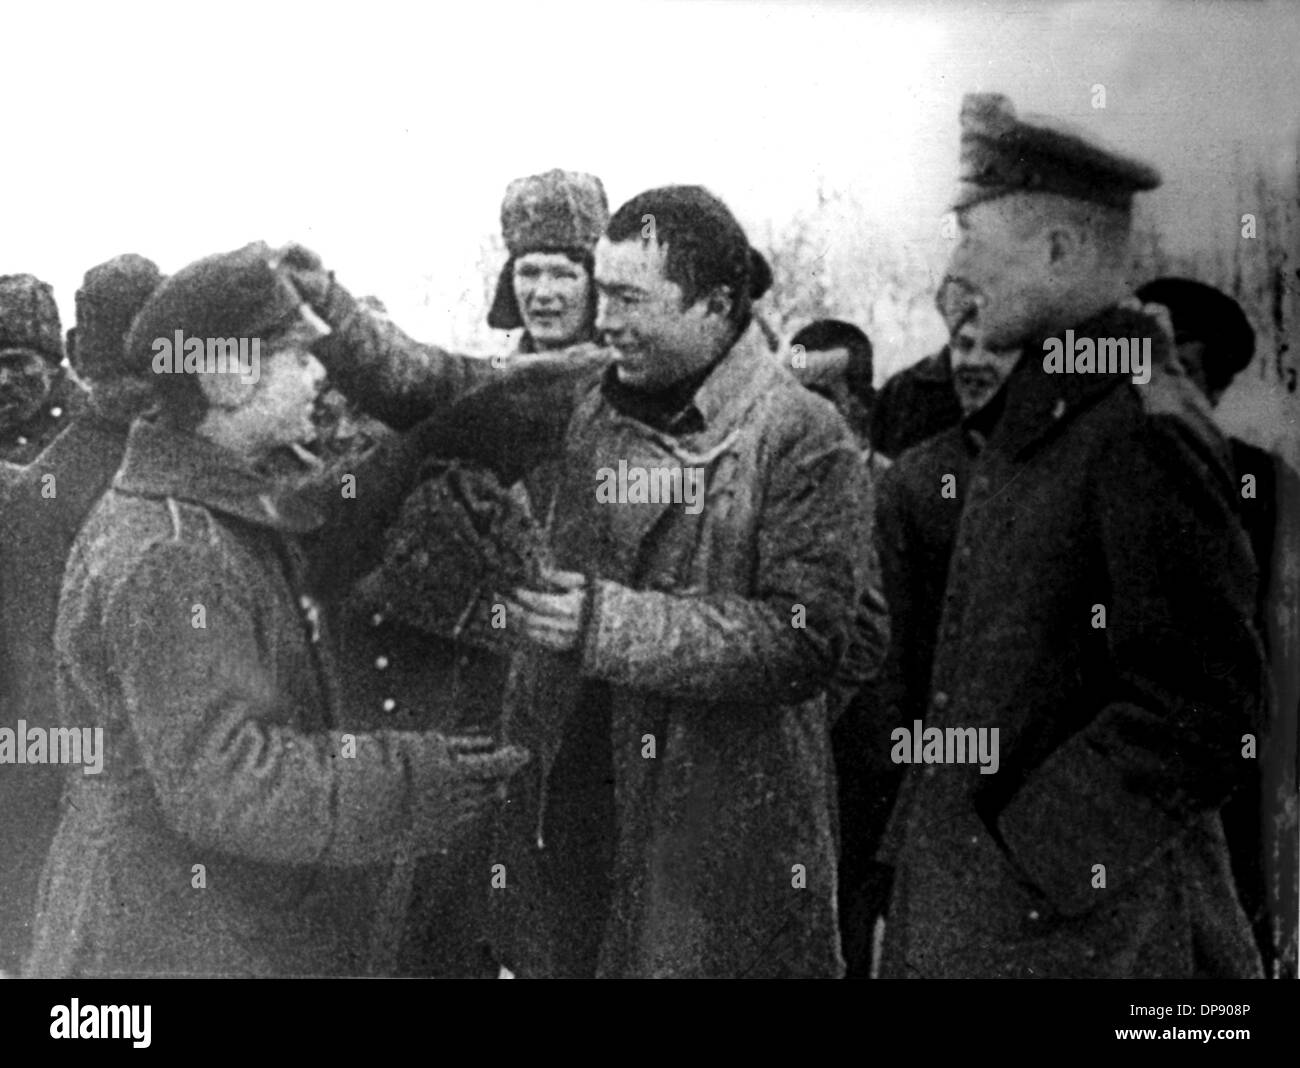 Fraternization of German and Russian soldiers at the Eastern Front after the breakout of the Russian Revolution in November 1917. Set off by the deadly shots on Austrian heir to the throne Franz Ferdinand by Serbian nationalists on the 28th of June in 1914 in Sarajevo, World War I broke out. During World War I, Germany, Austria, Austria-Hungary as well as later Turkey and Bulgary fought against Britain, France and Russia. The sad end result in 1918 comprised roughly 8.5 million soldiers killed in action, more than 21 million wounded and almost 8 million prisoners of war and missing people. Stock Photo